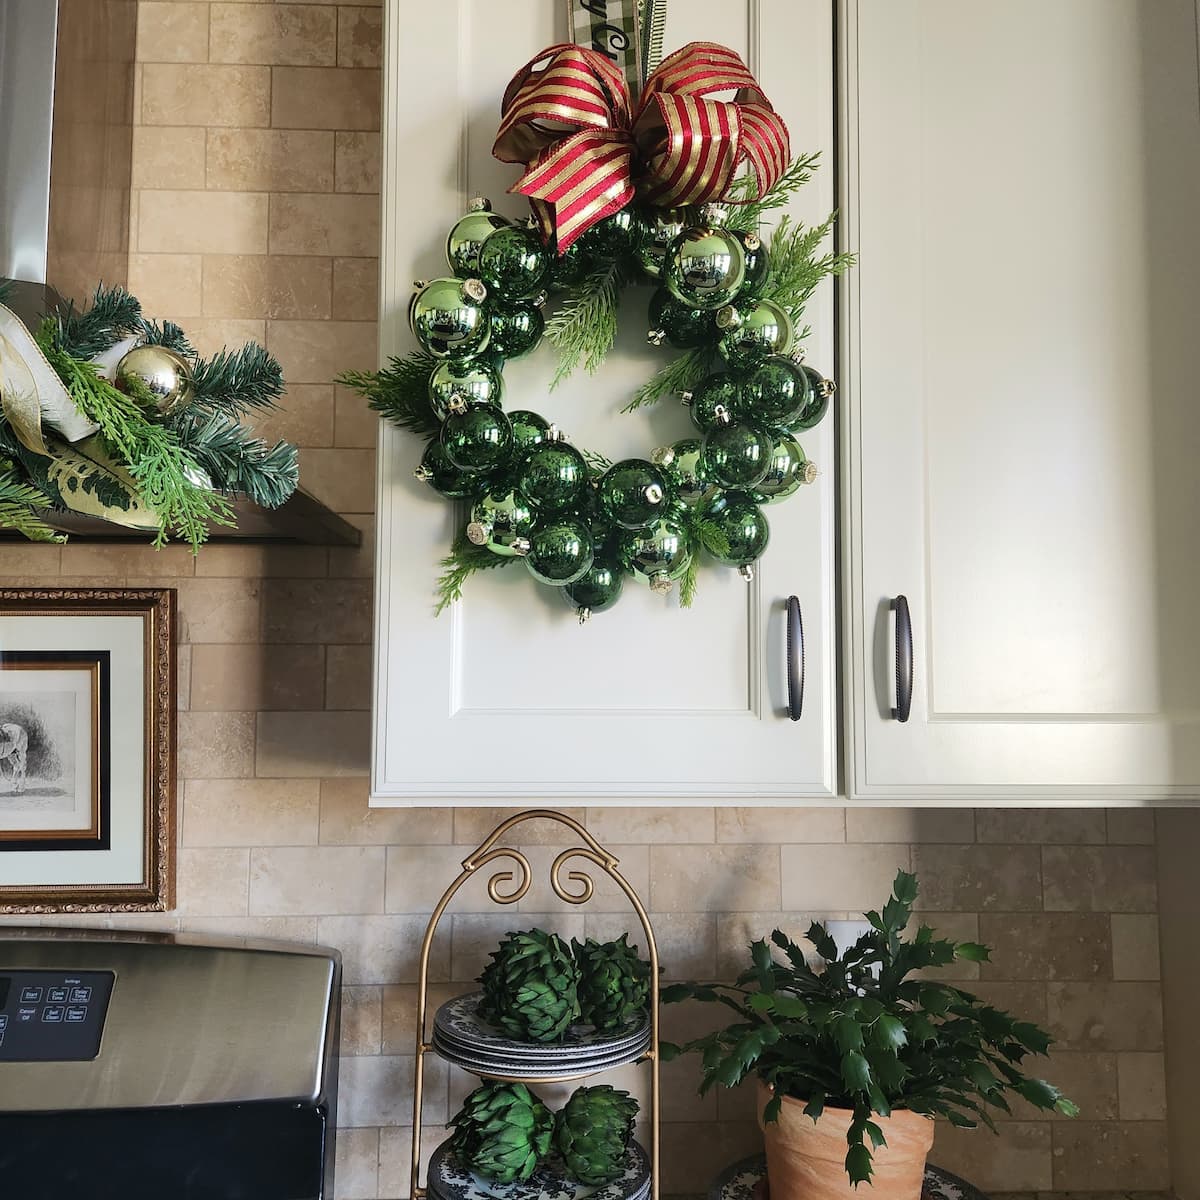 Easy to Make DIY Christmas Wreath with Ornaments